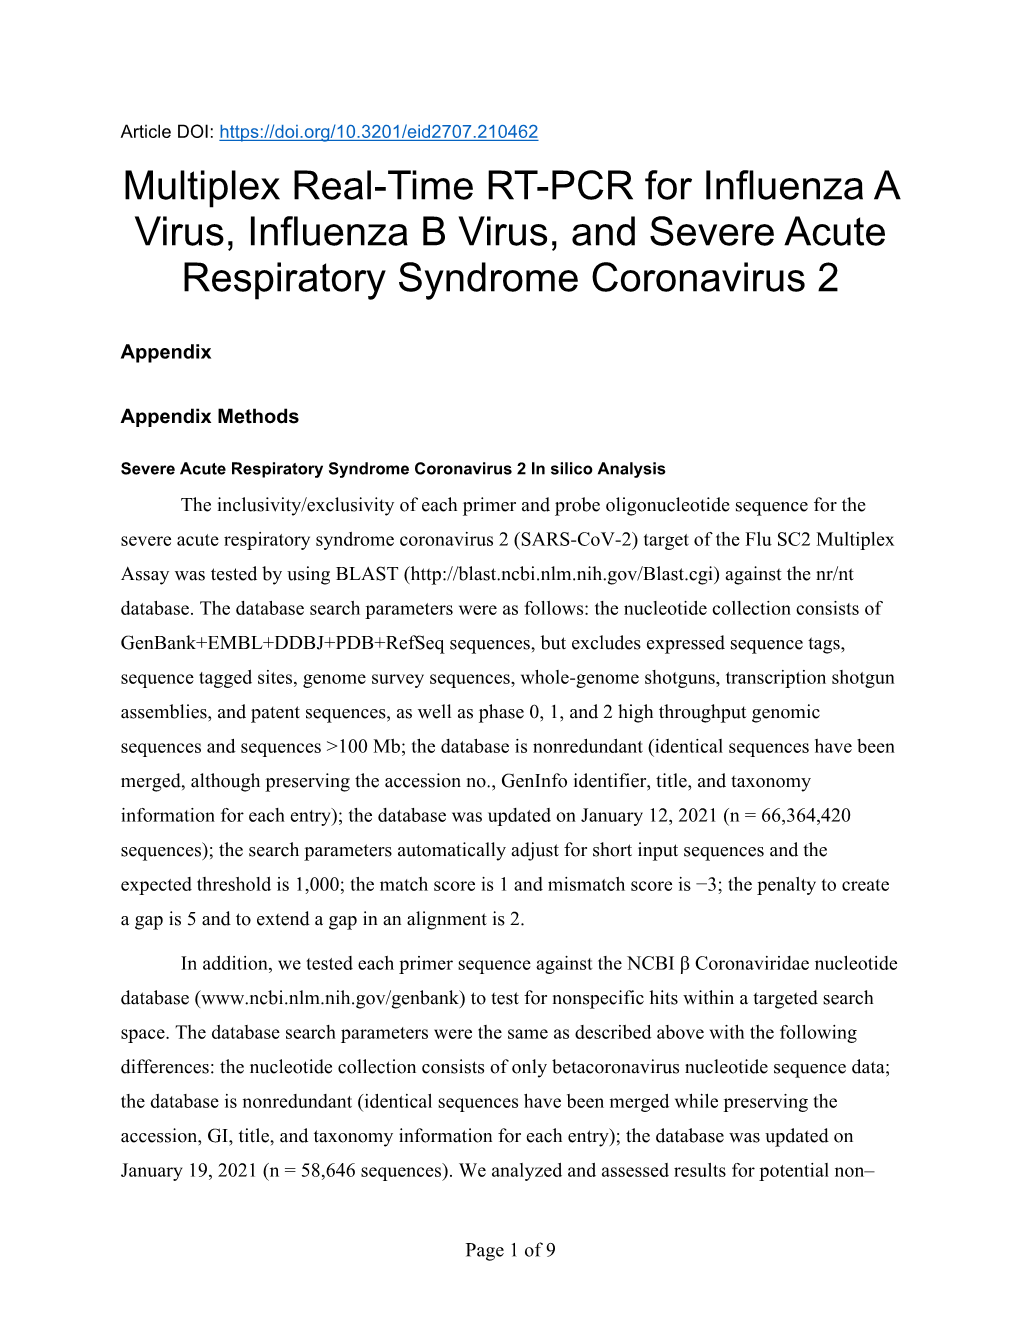 Multiplex Real-Time RT-PCR for Influenza a Virus, Influenza B Virus, and Severe Acute Respiratory Syndrome Coronavirus 2